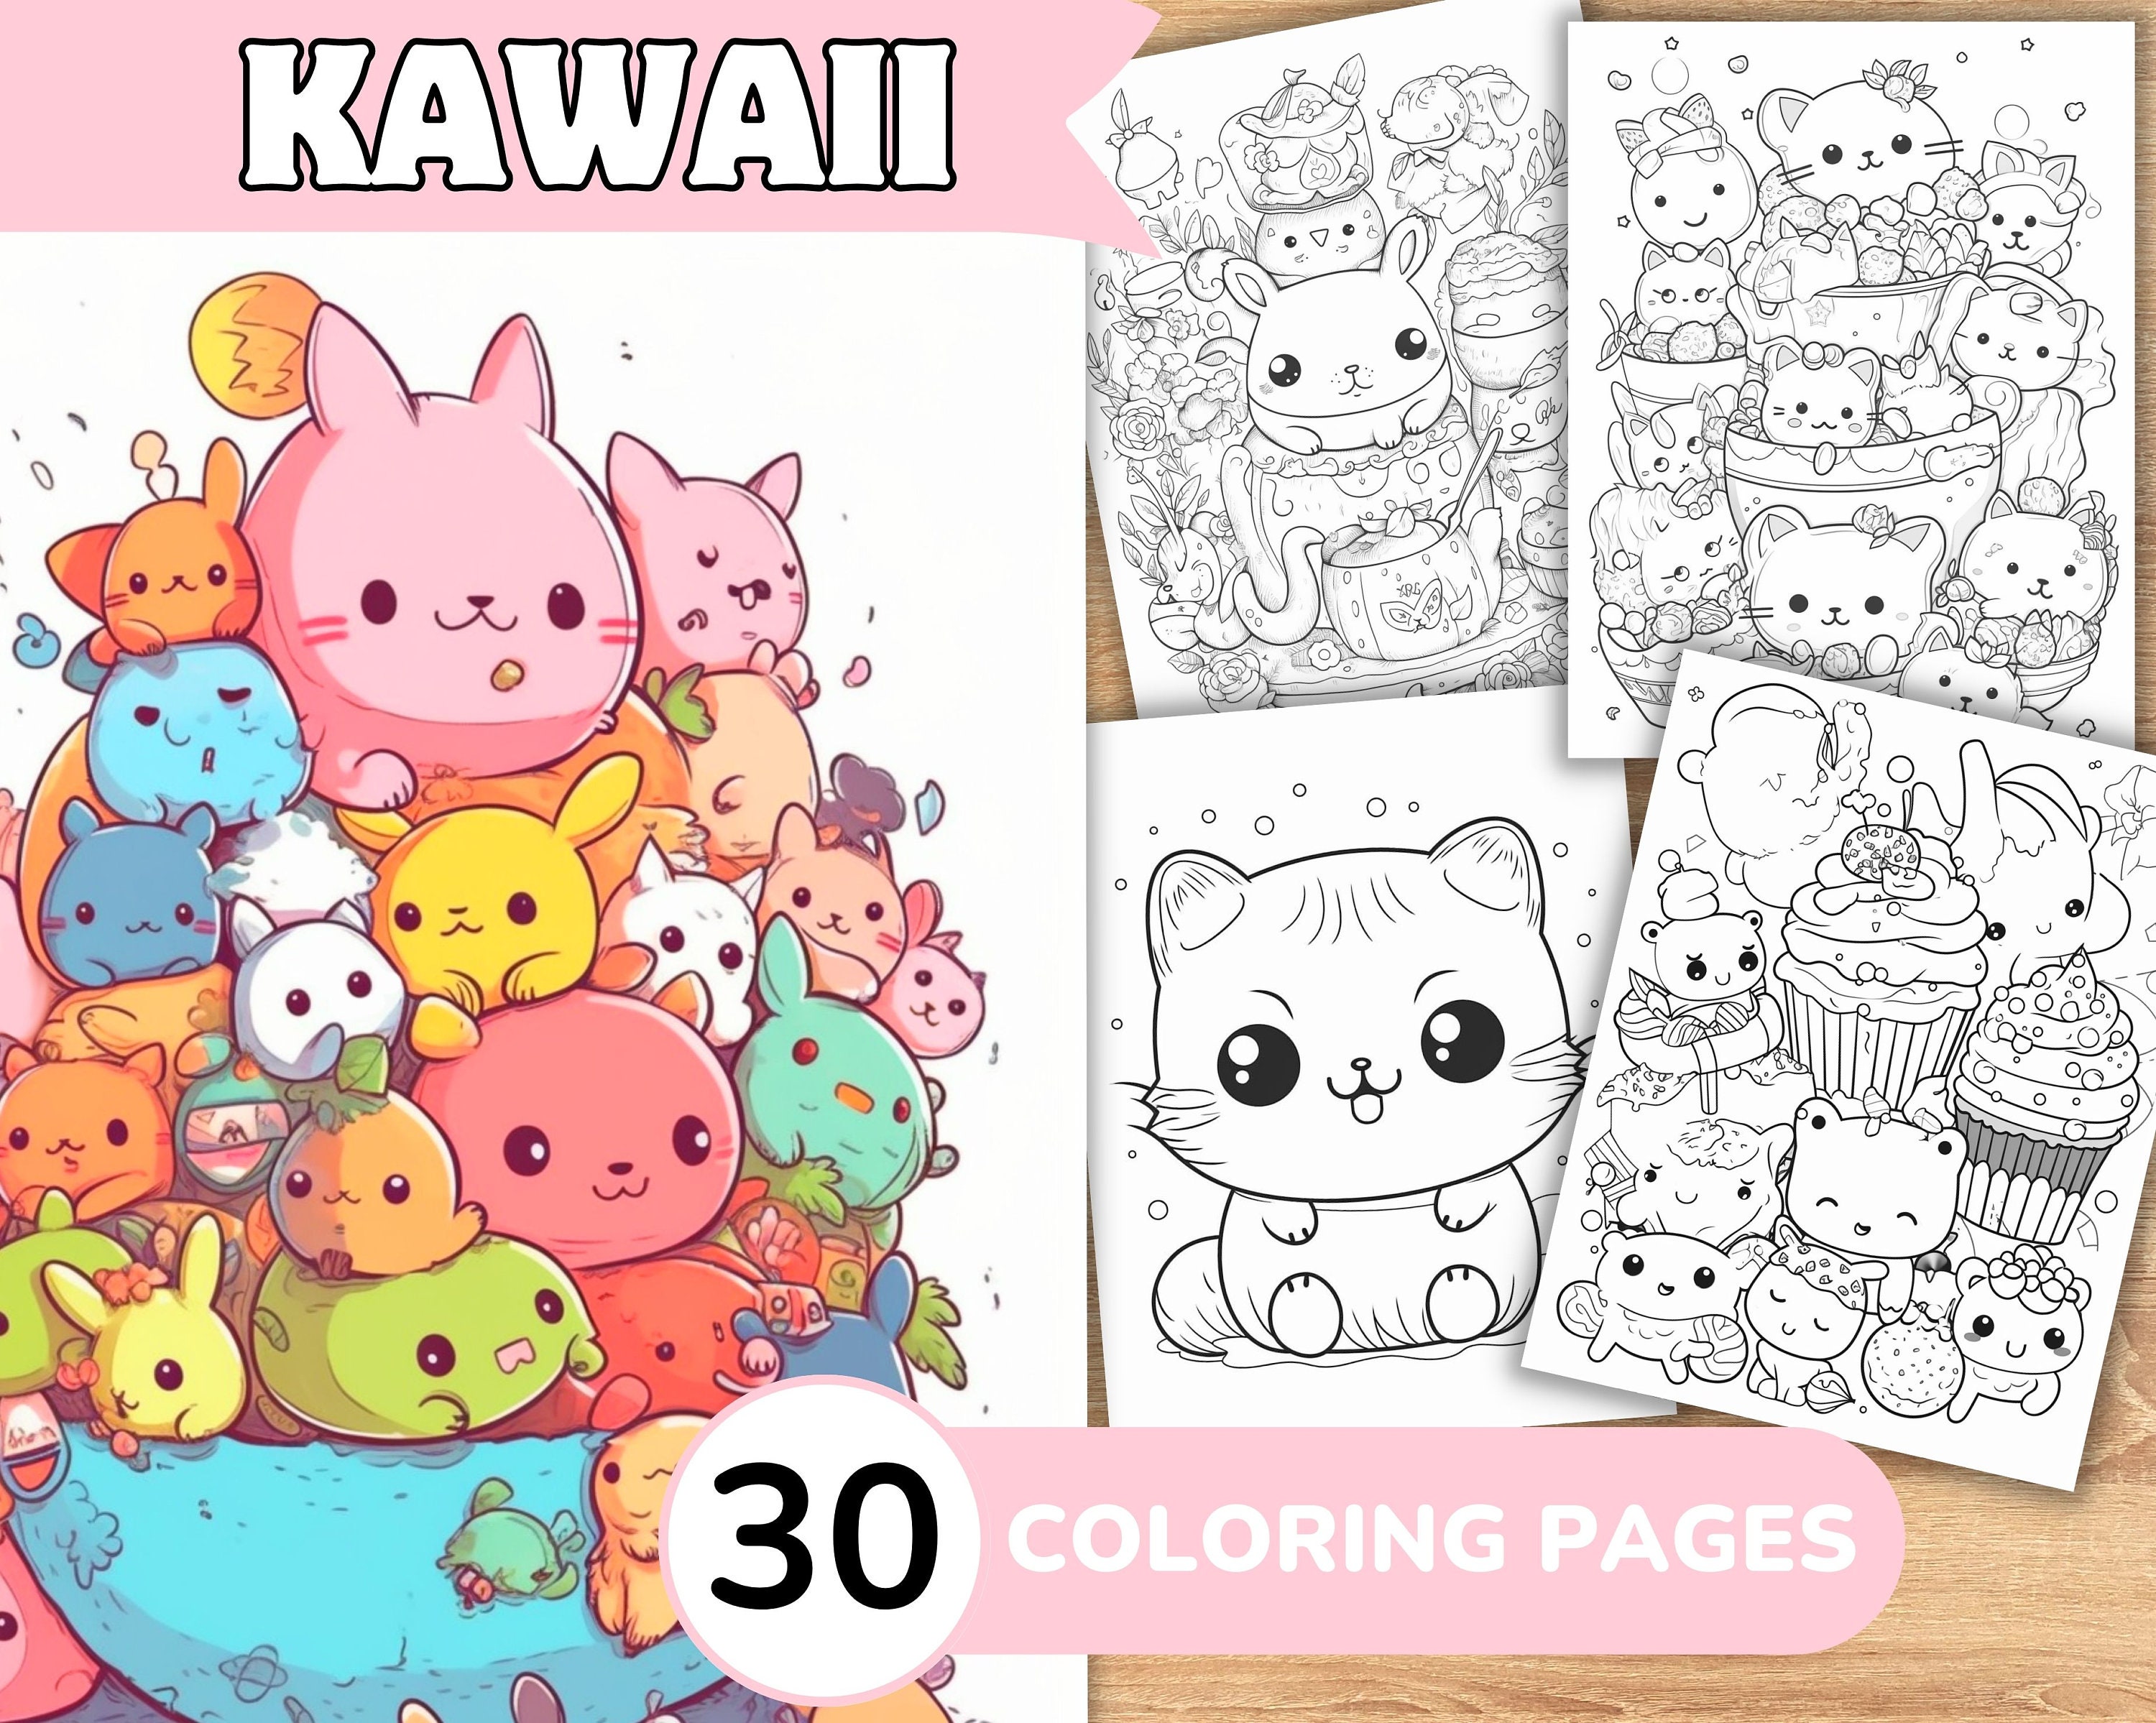 Cute Kawaii Flowers Coloring Pages